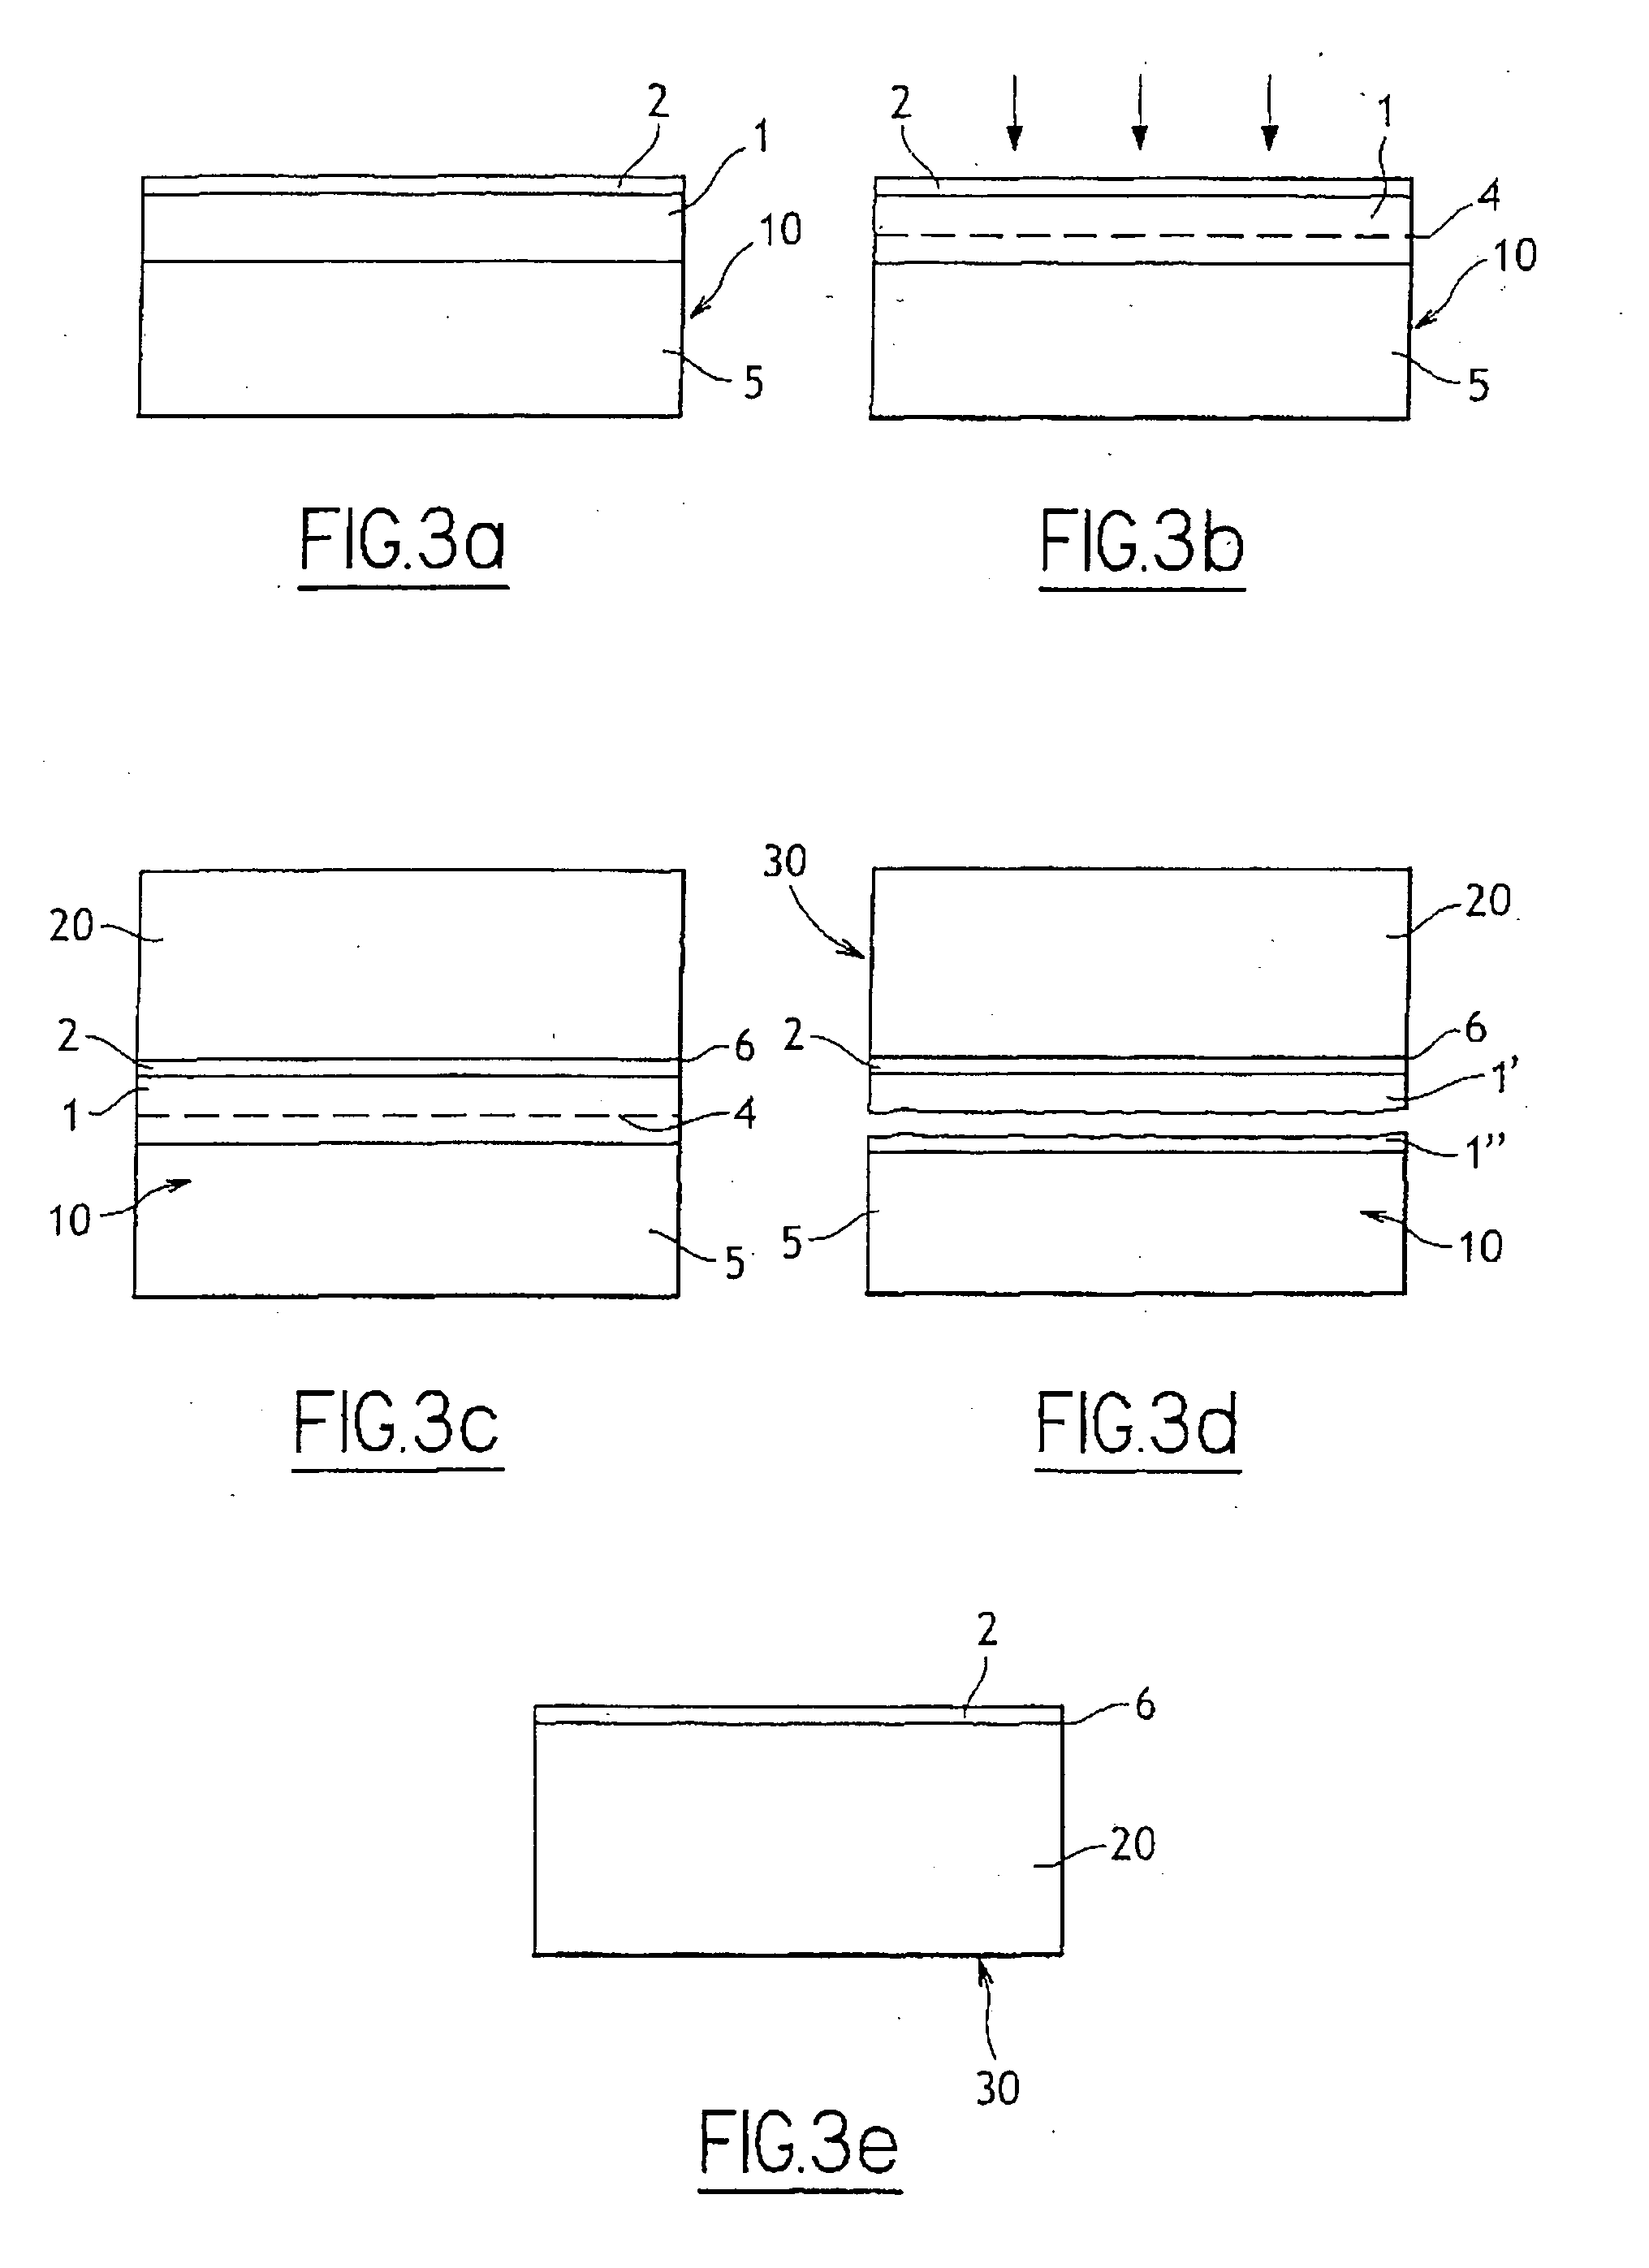 Atomic implantation and thermal treatment of a semiconductor layer